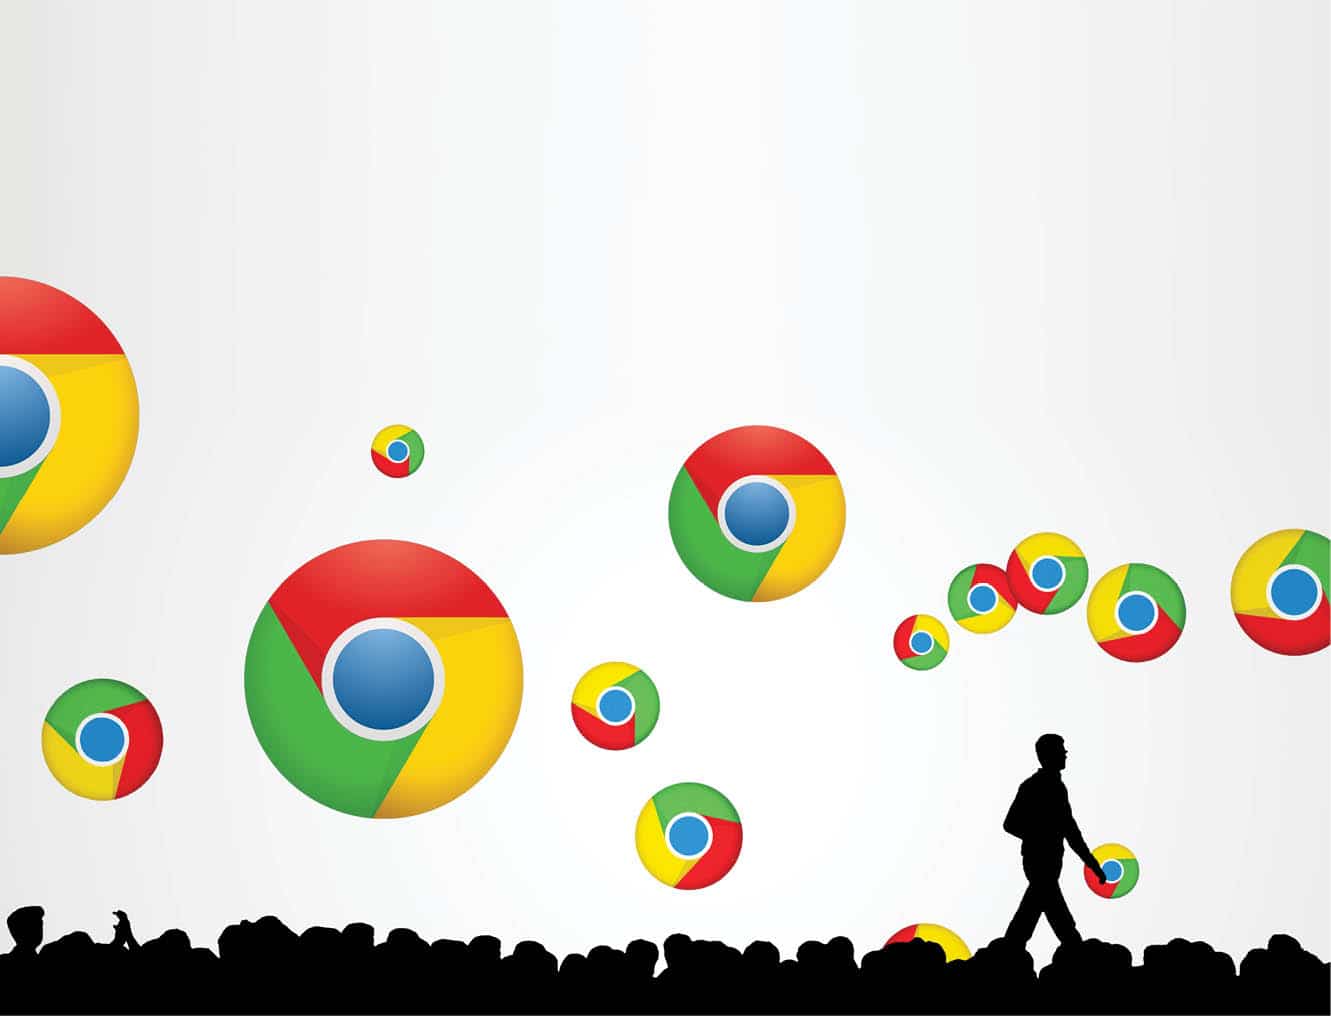 Google Chrome 55 with by default HTML5 option